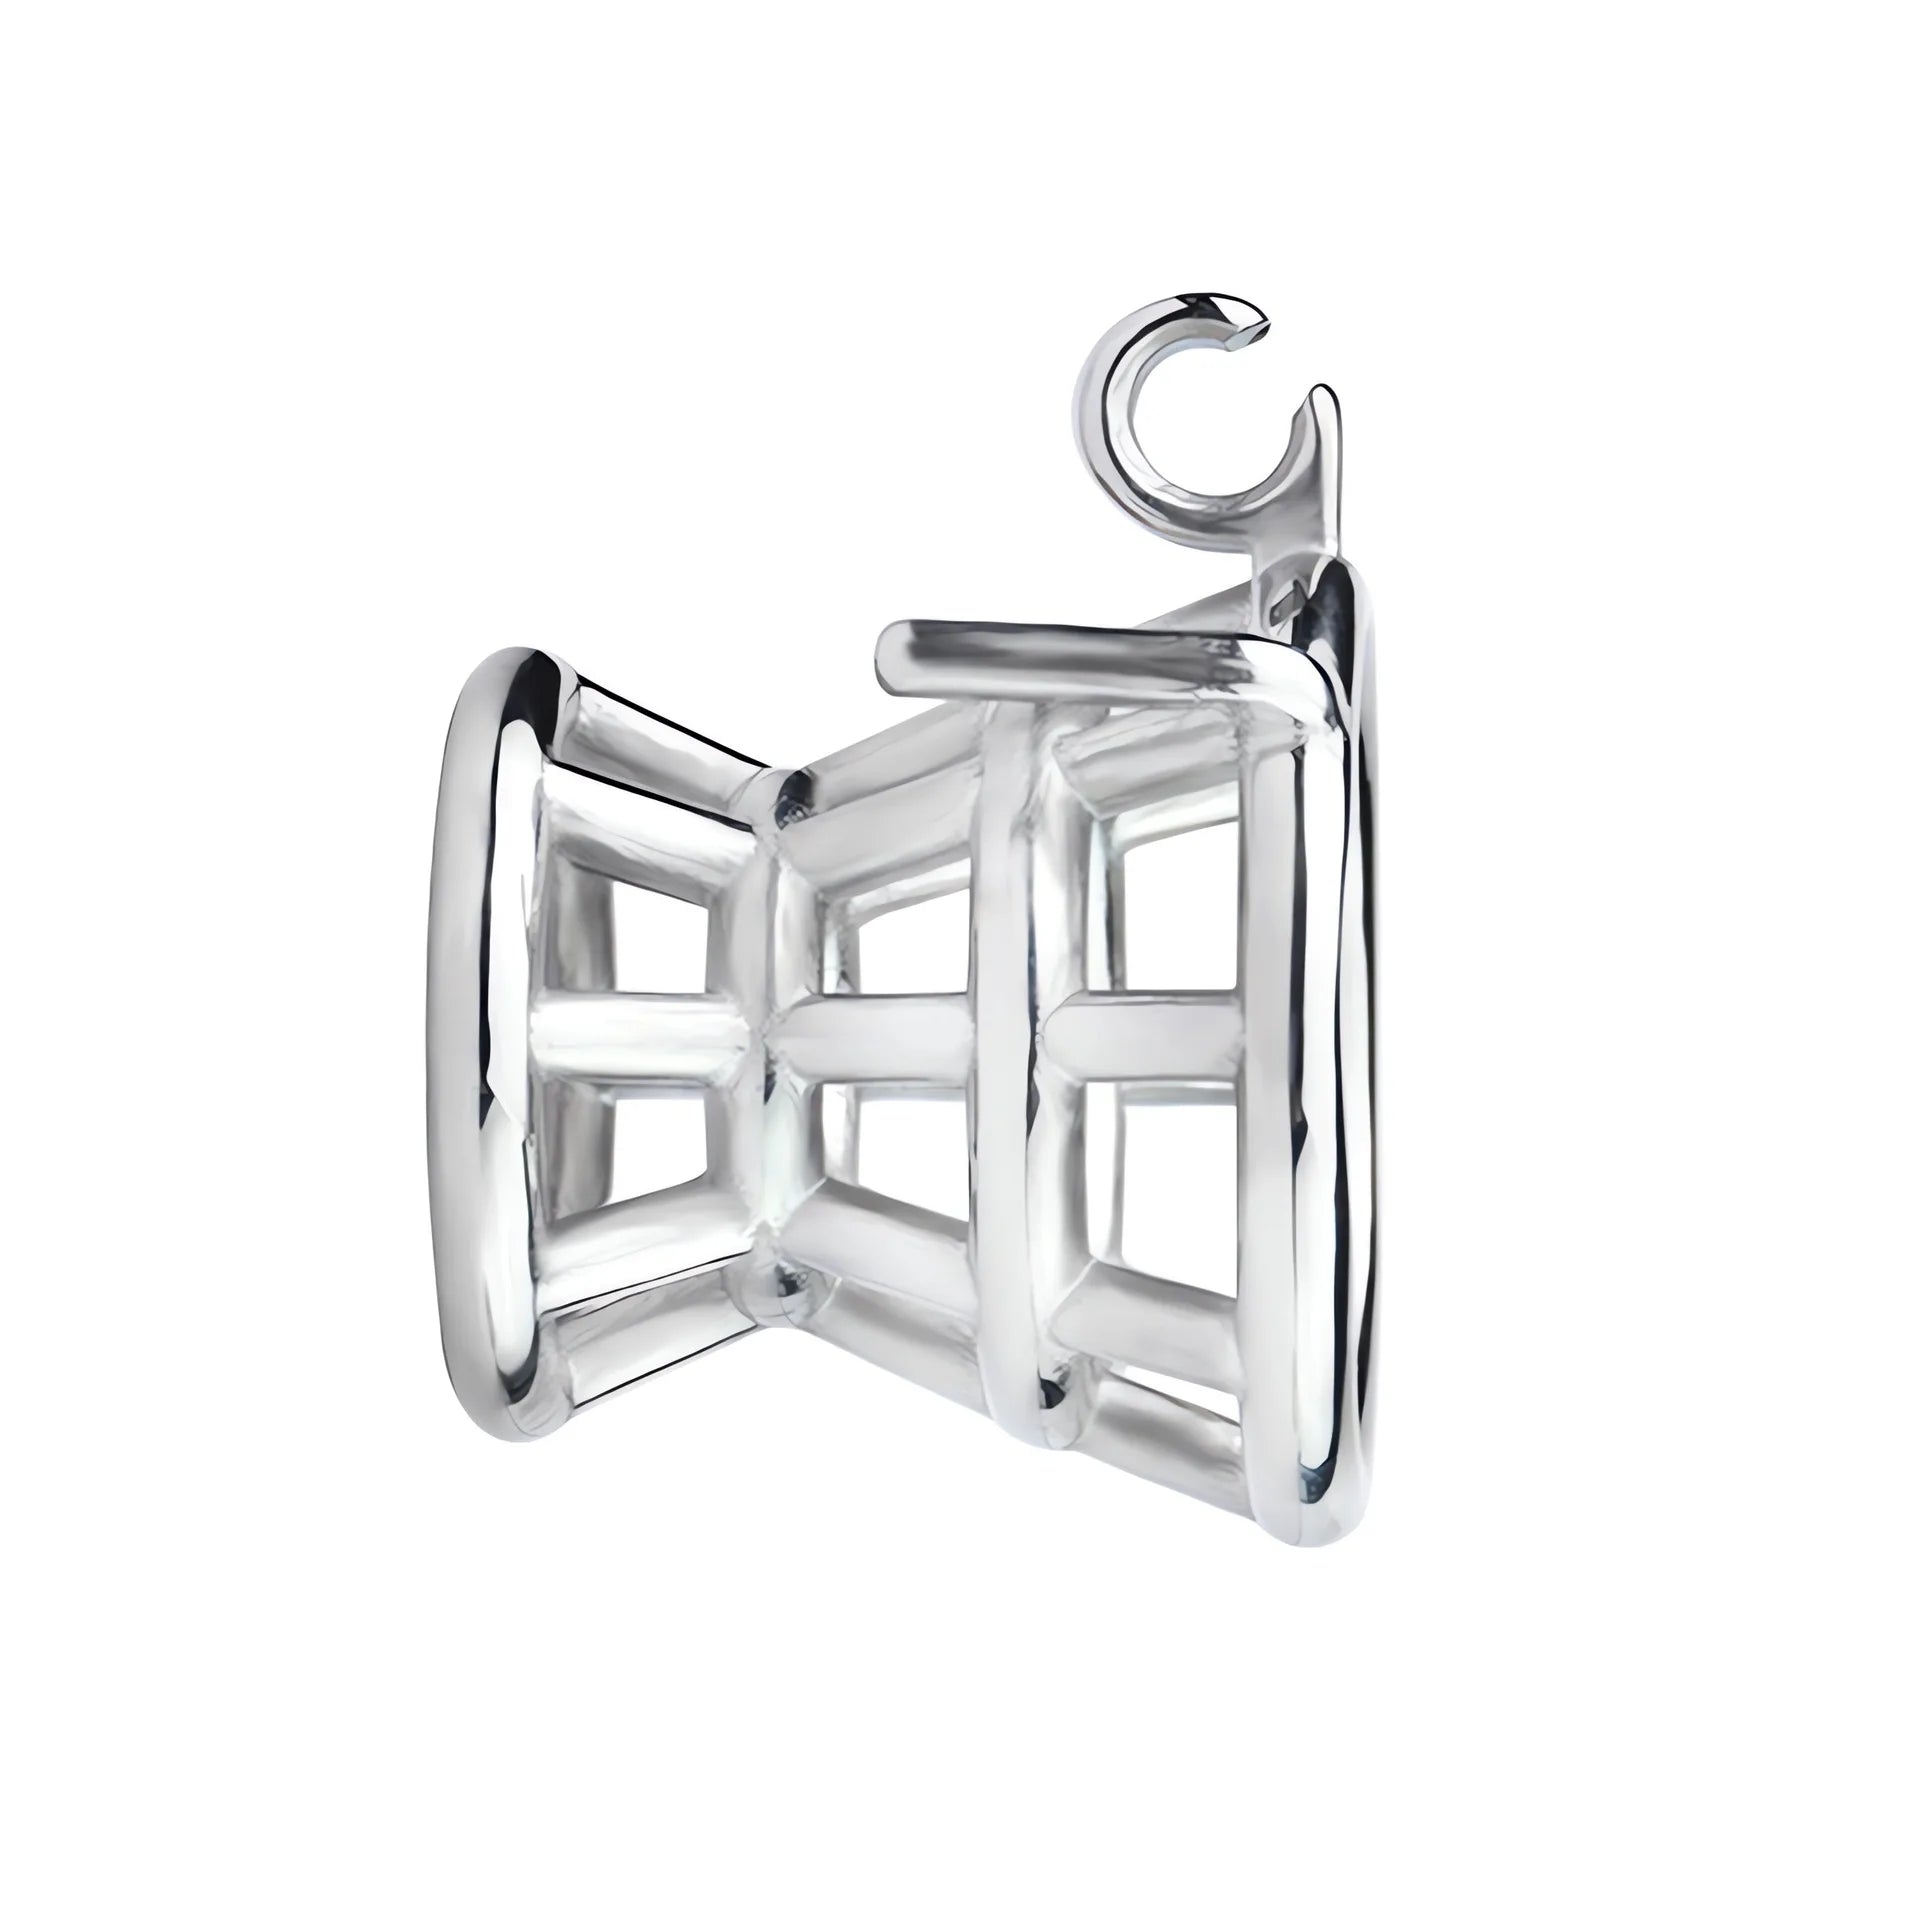 negative chastity cage for men